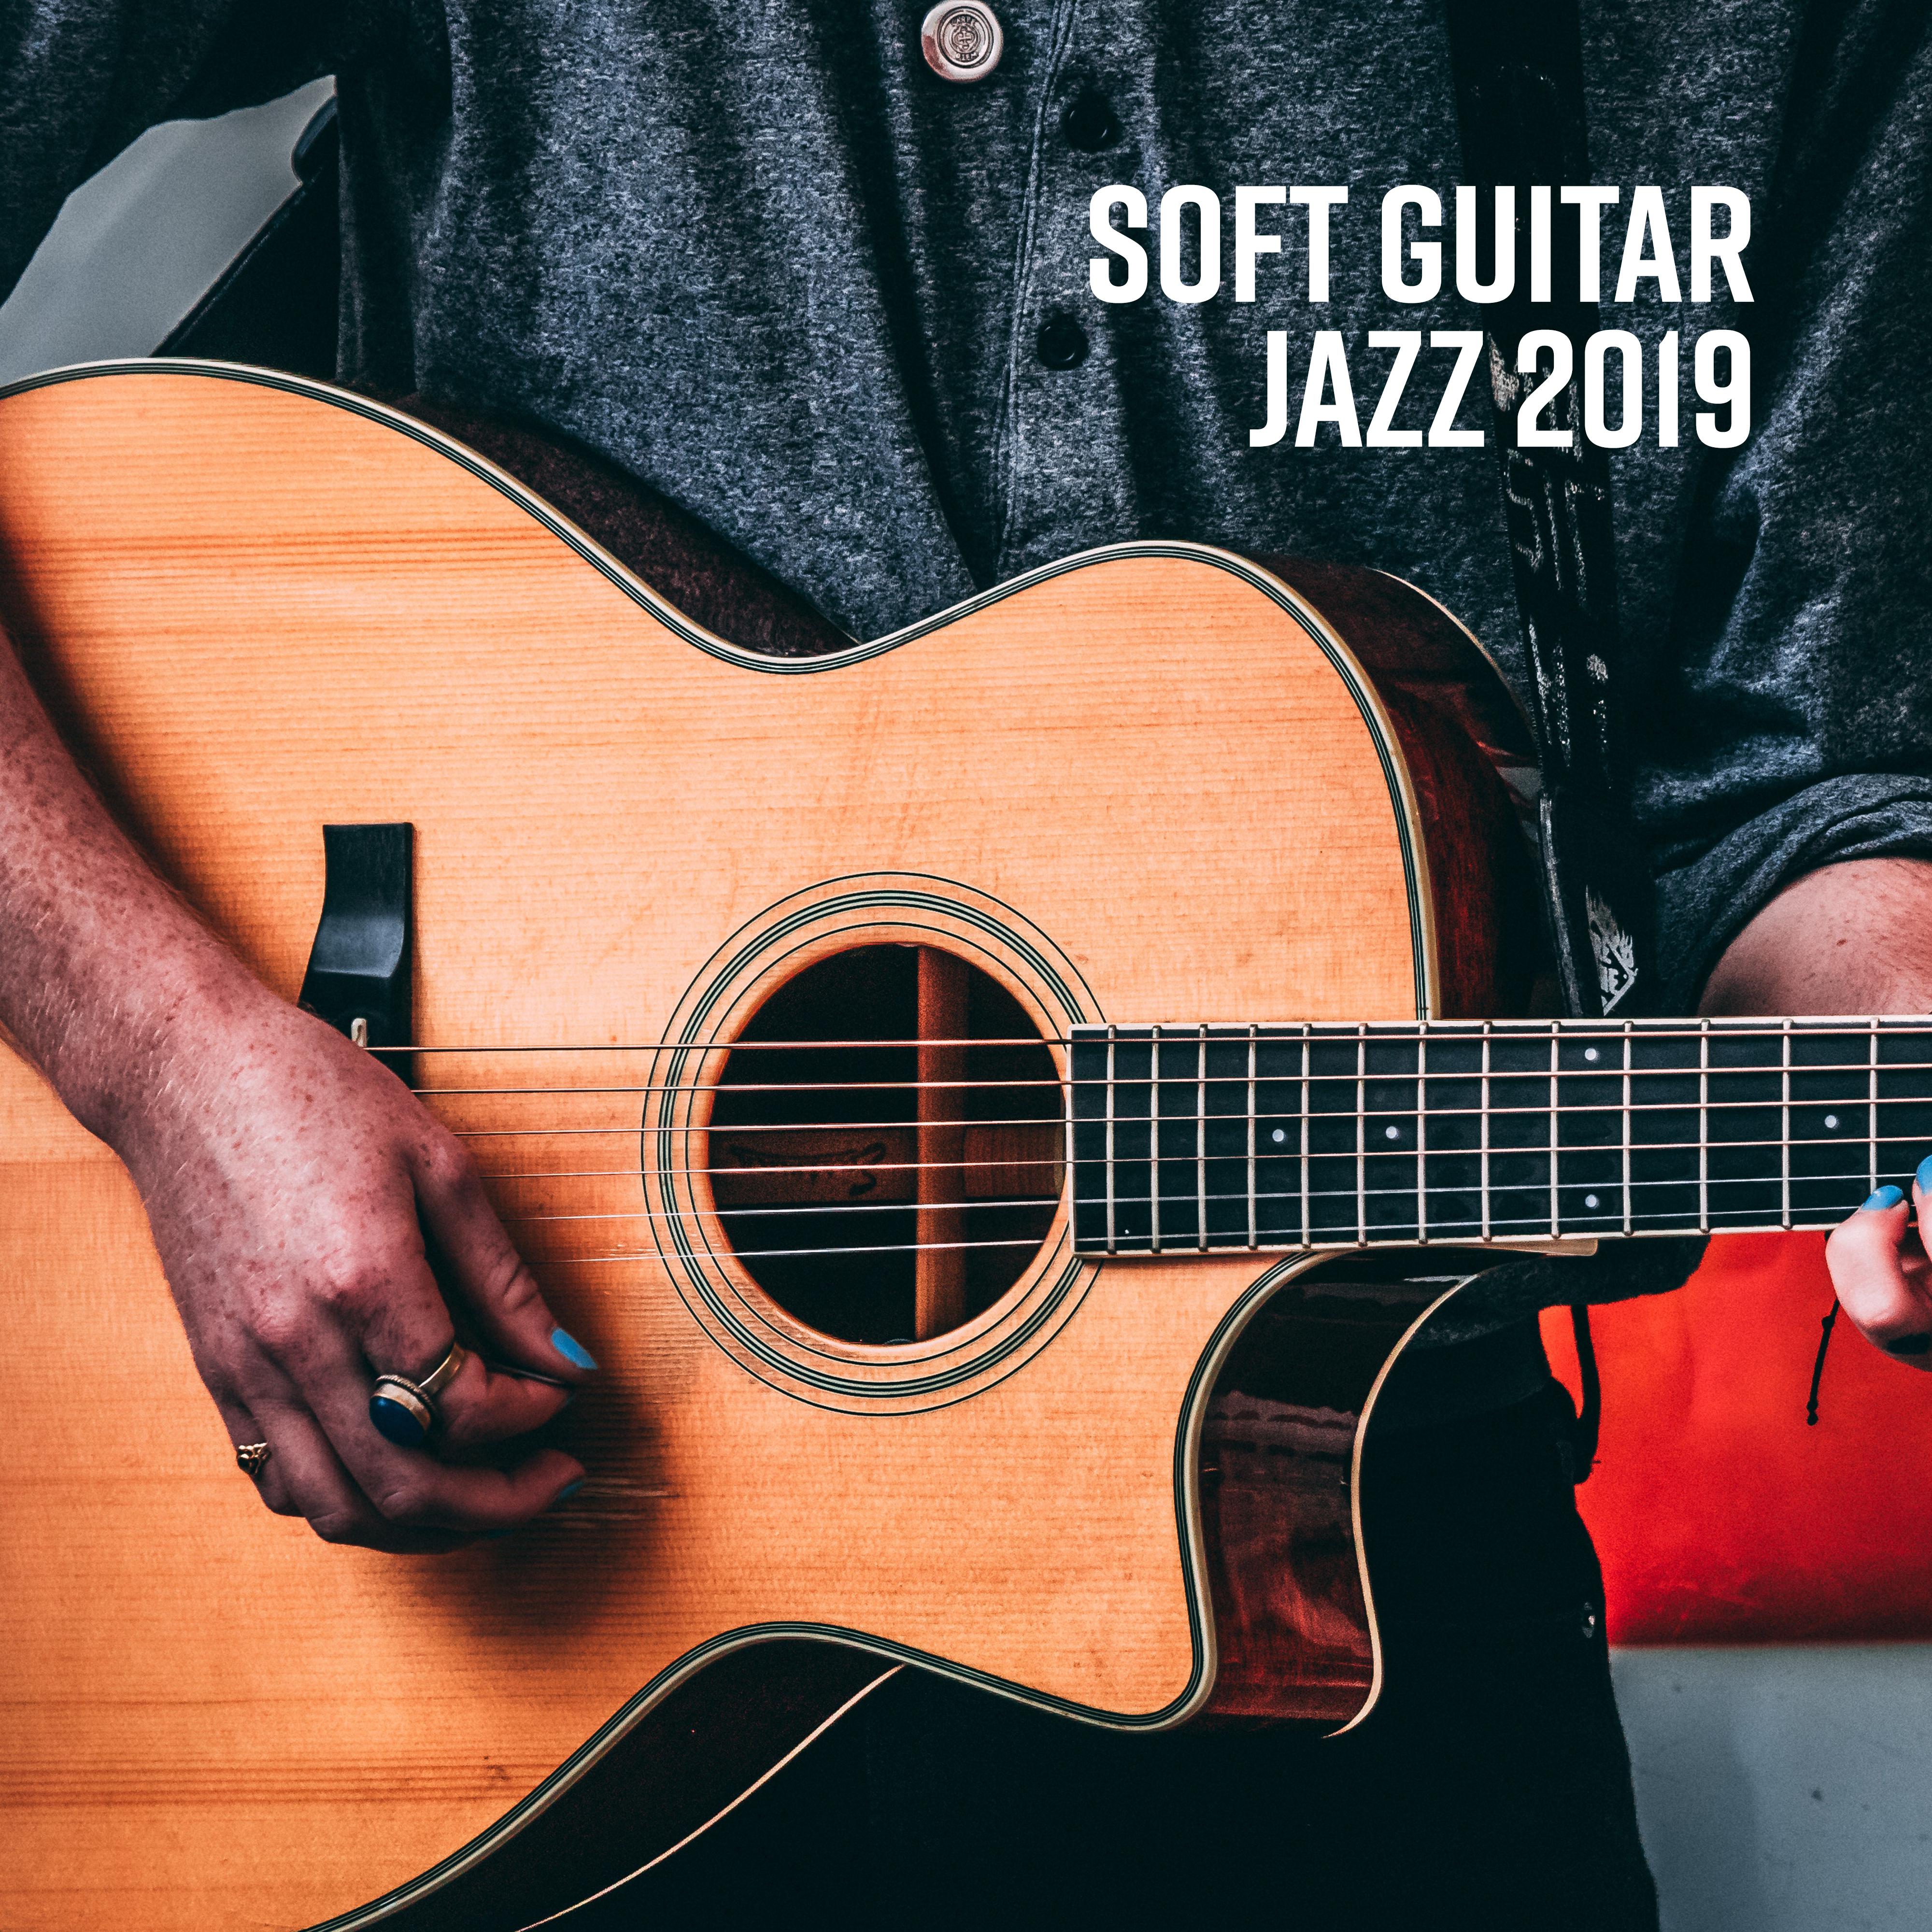 Soft Guitar Jazz 2019  Instrumental Music for Relaxation  Rest, Relax Zone, Jazz Lounge, Jazz Music Ambient, Sounds of Guitar